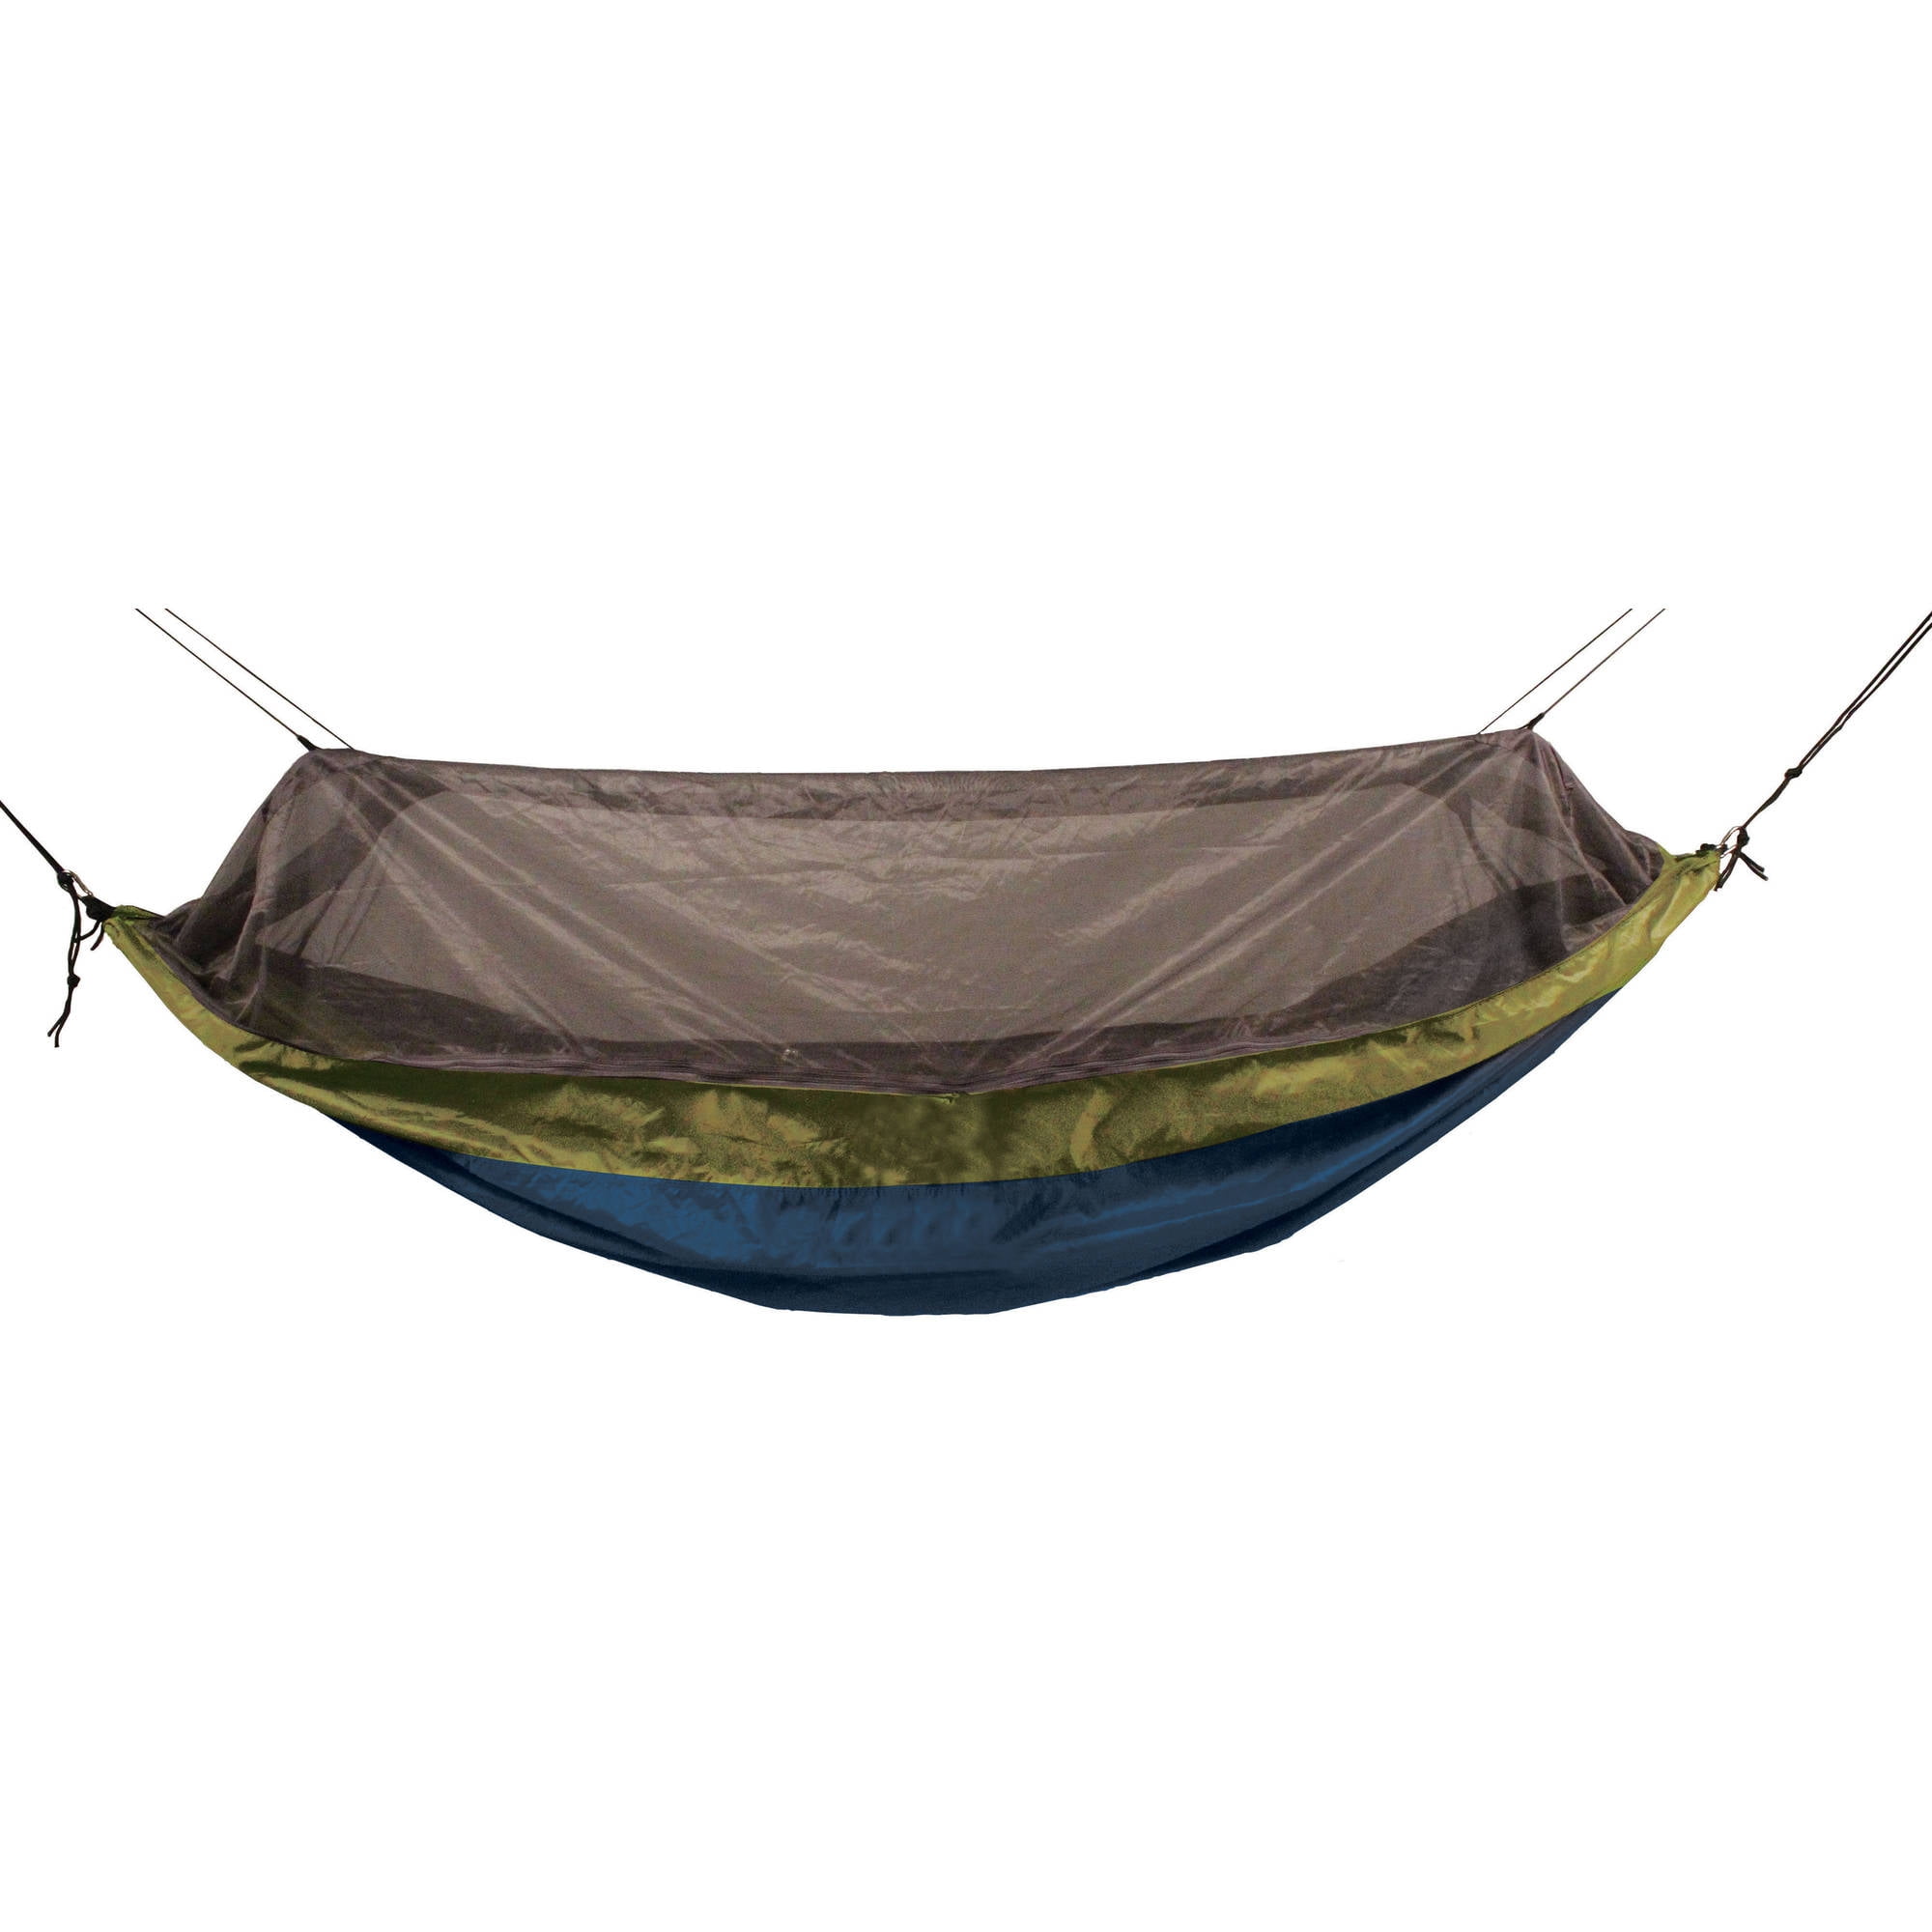 Equip Nylon Mosquito Hammock with Attached Bug Net, 1 Person and Taupe, Open Size 115" L x 59" W - Walmart.com